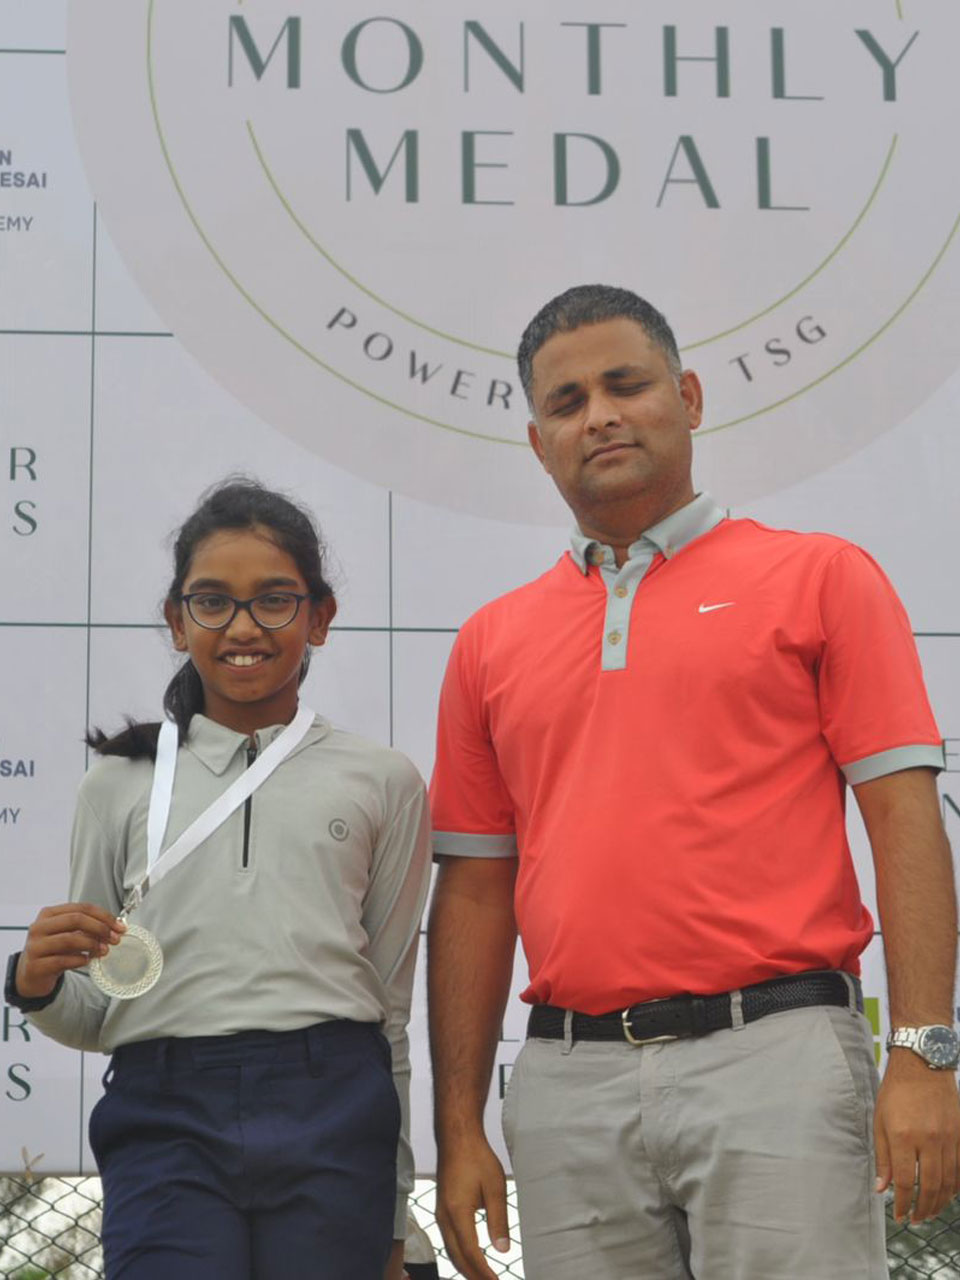 Isha Rajesh finished as runner up in the 'C' Girls Category at the Clover Greens Junior Monthly Medal powered by TSG, held at Clover Greens Golf Course in Bangalore.